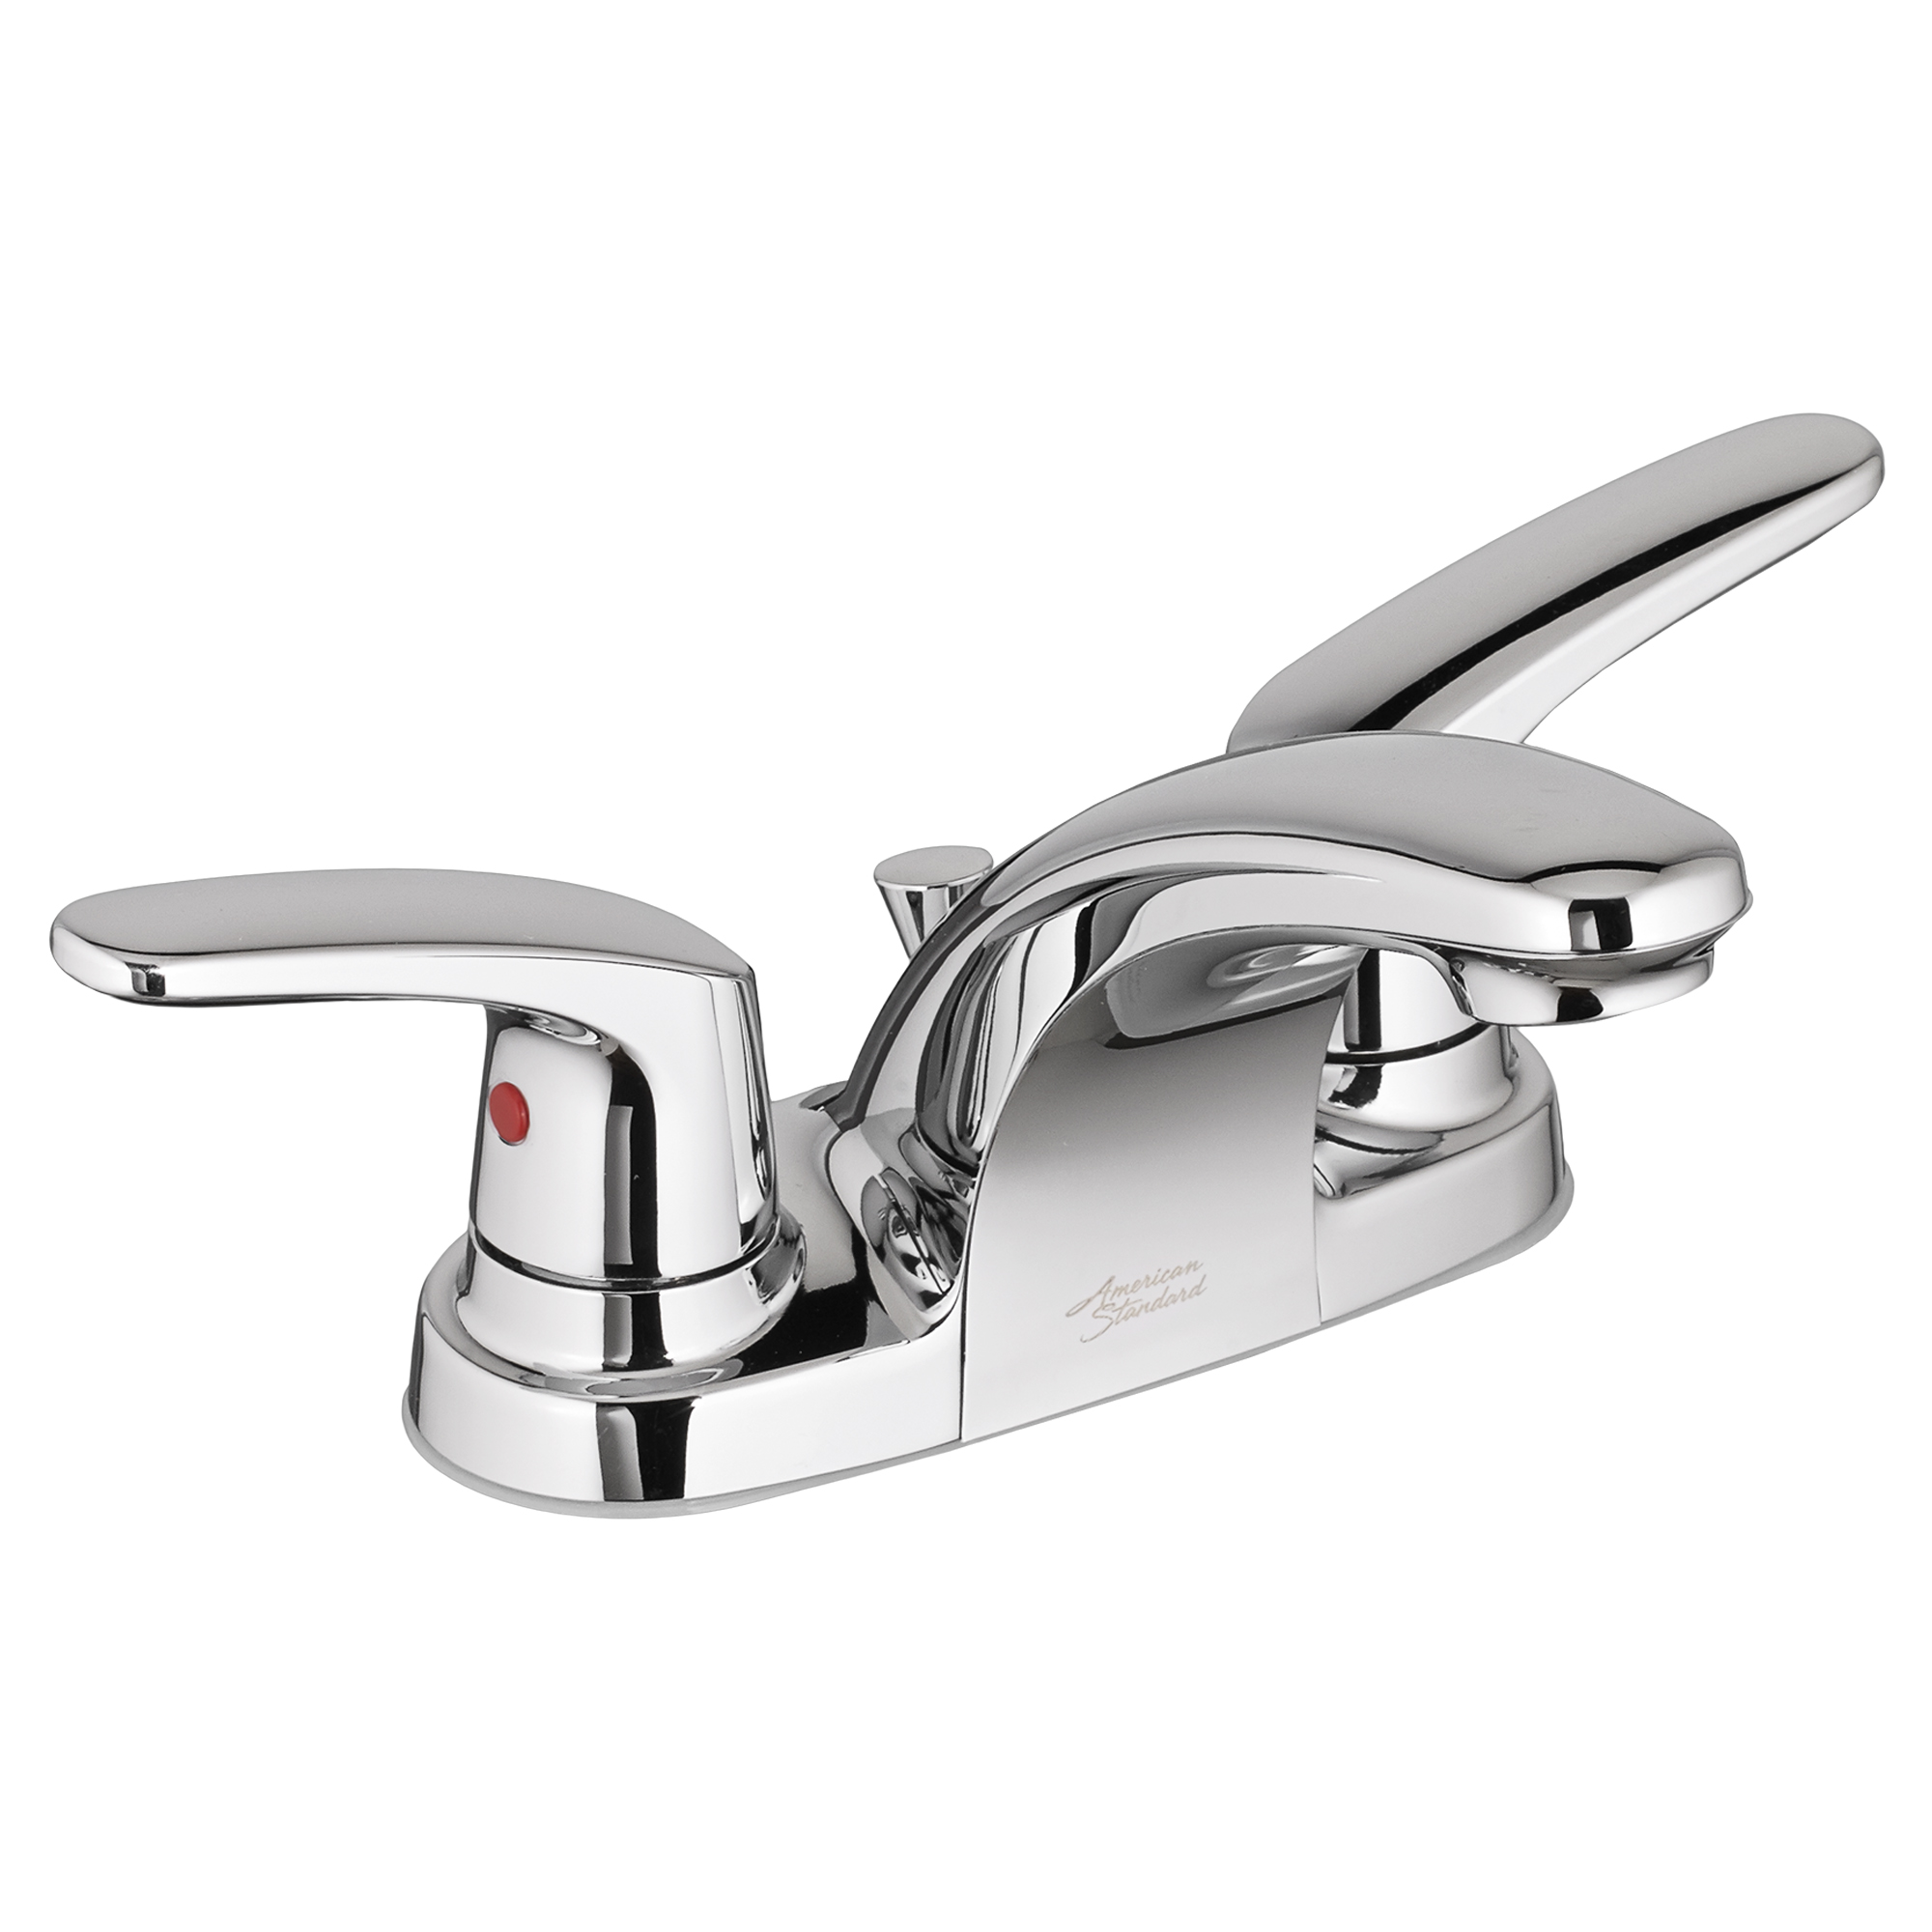 Colony™ PRO 4-Inch Centerset 2-Handle Bathroom Faucet 1.2 gpm/4.5 Lpm With Lever Handles